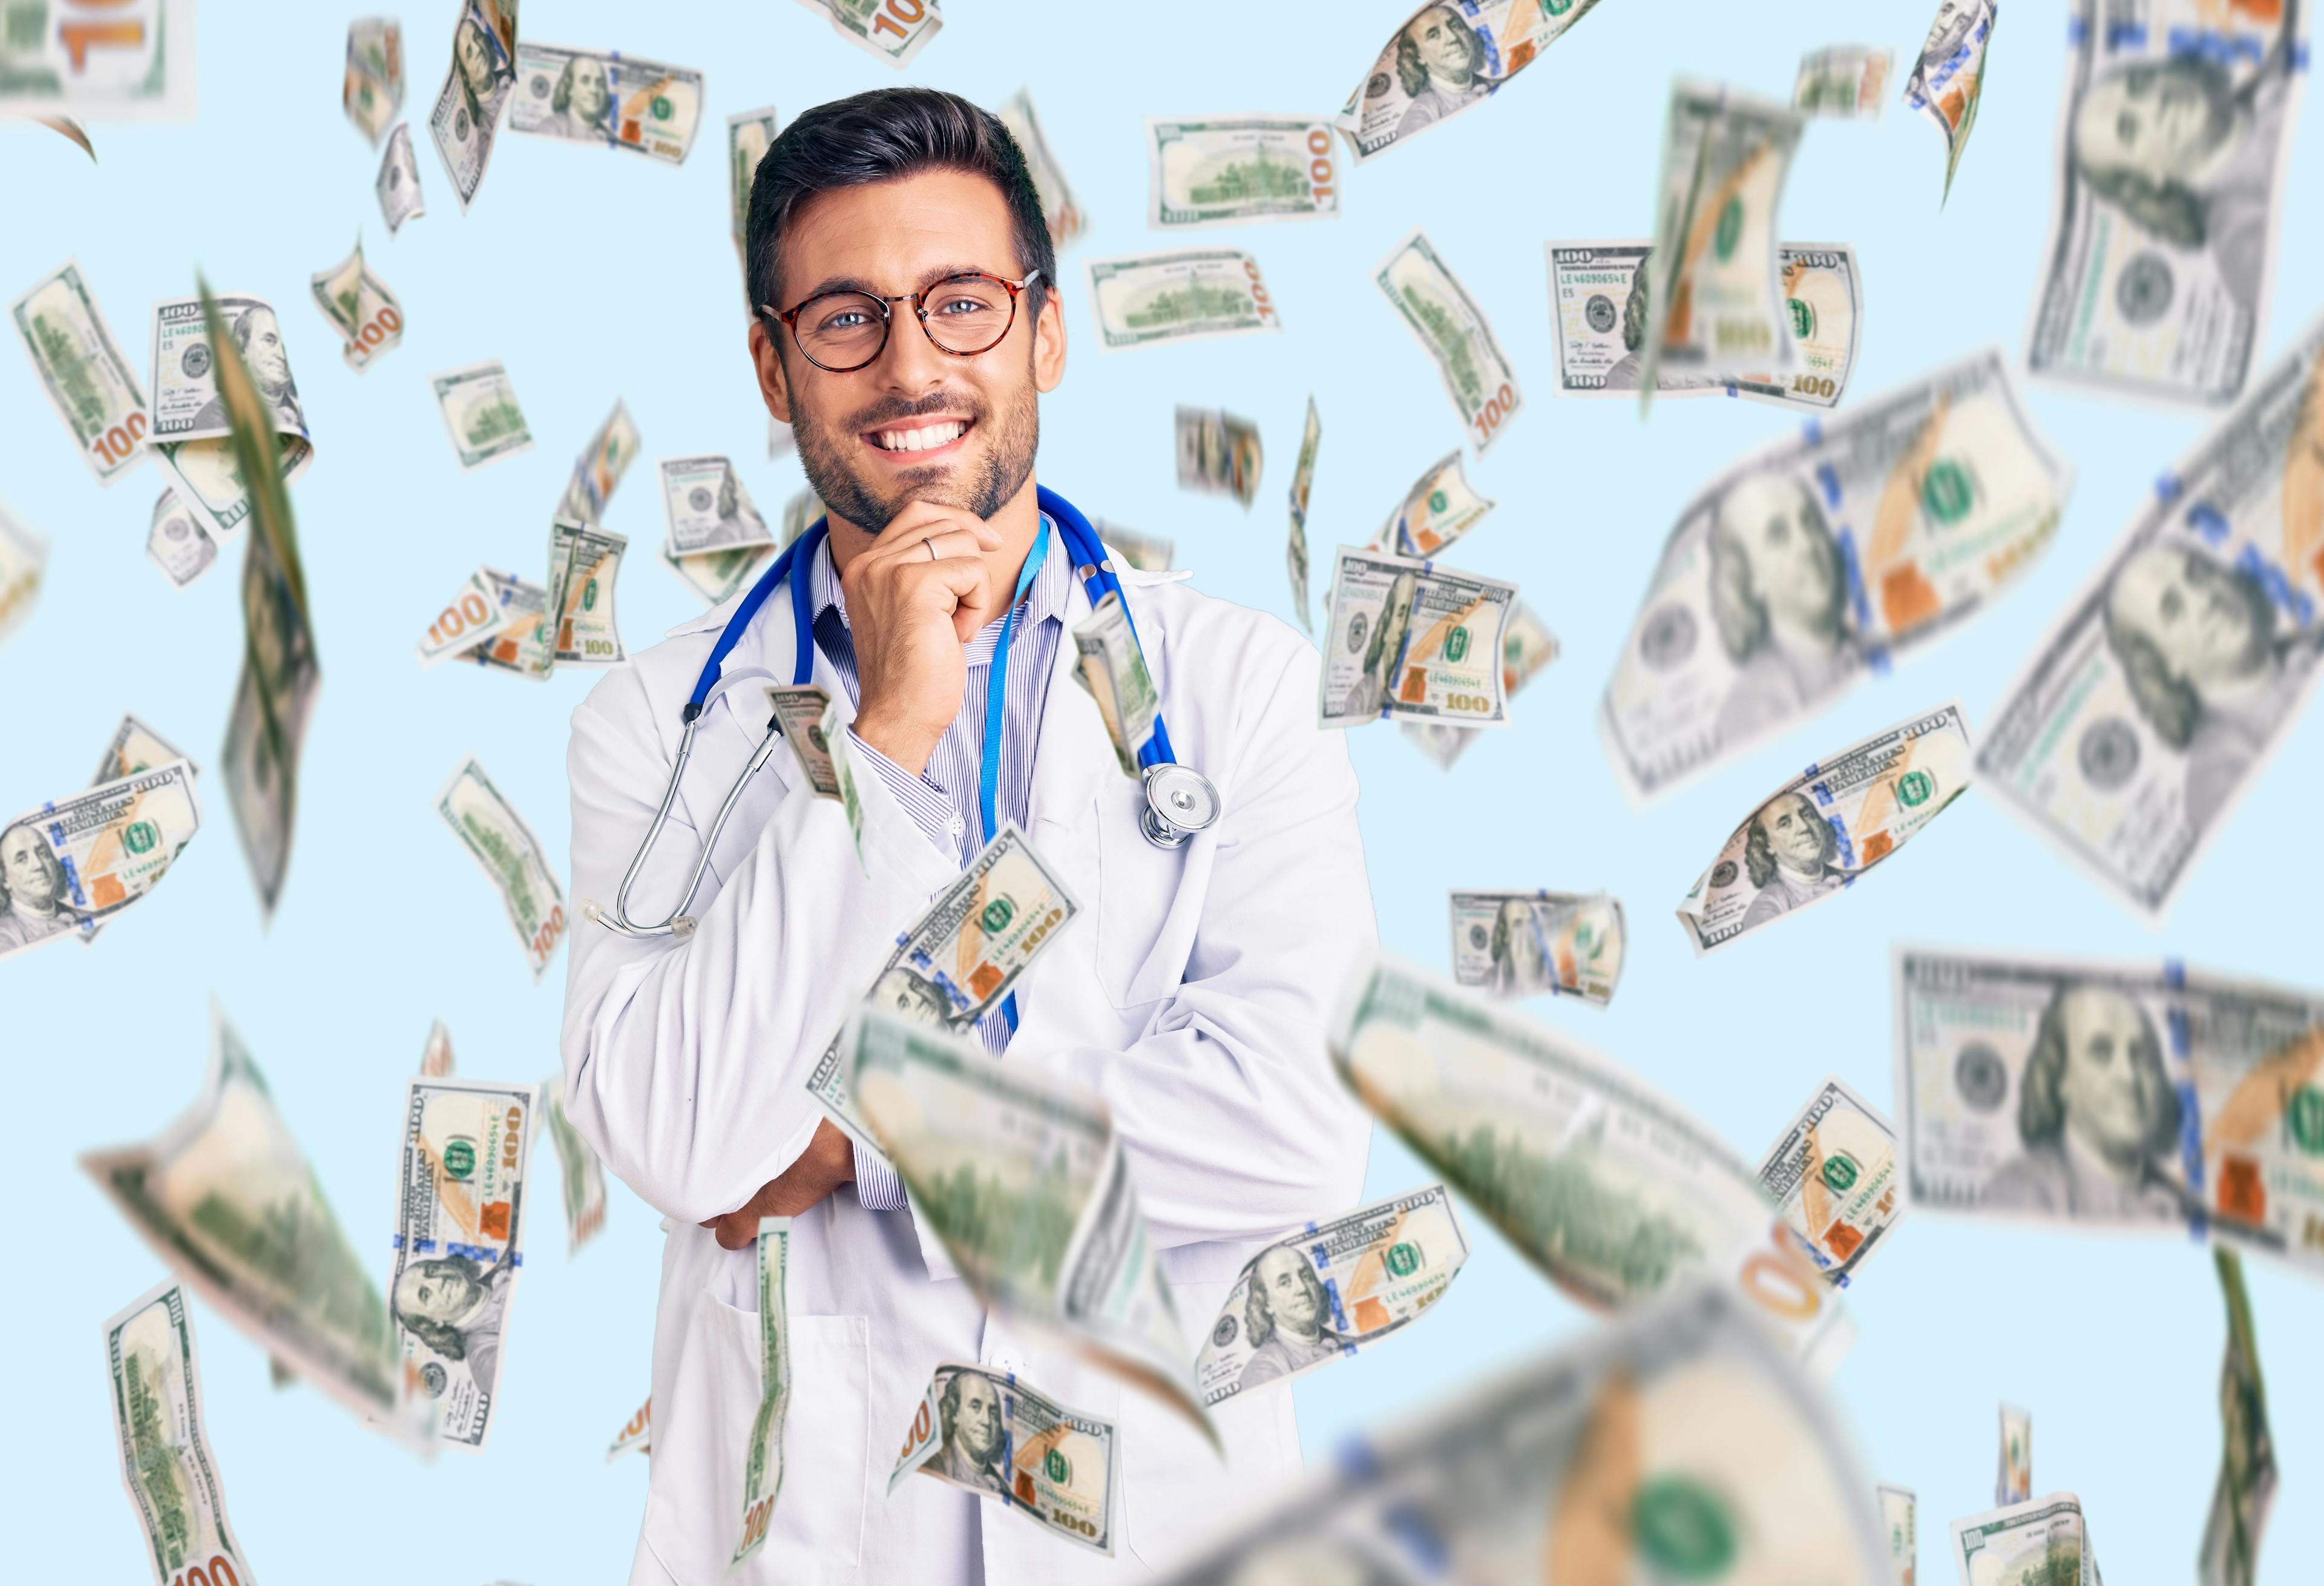 8 budget-friendly ways to market your practice during COVID-19